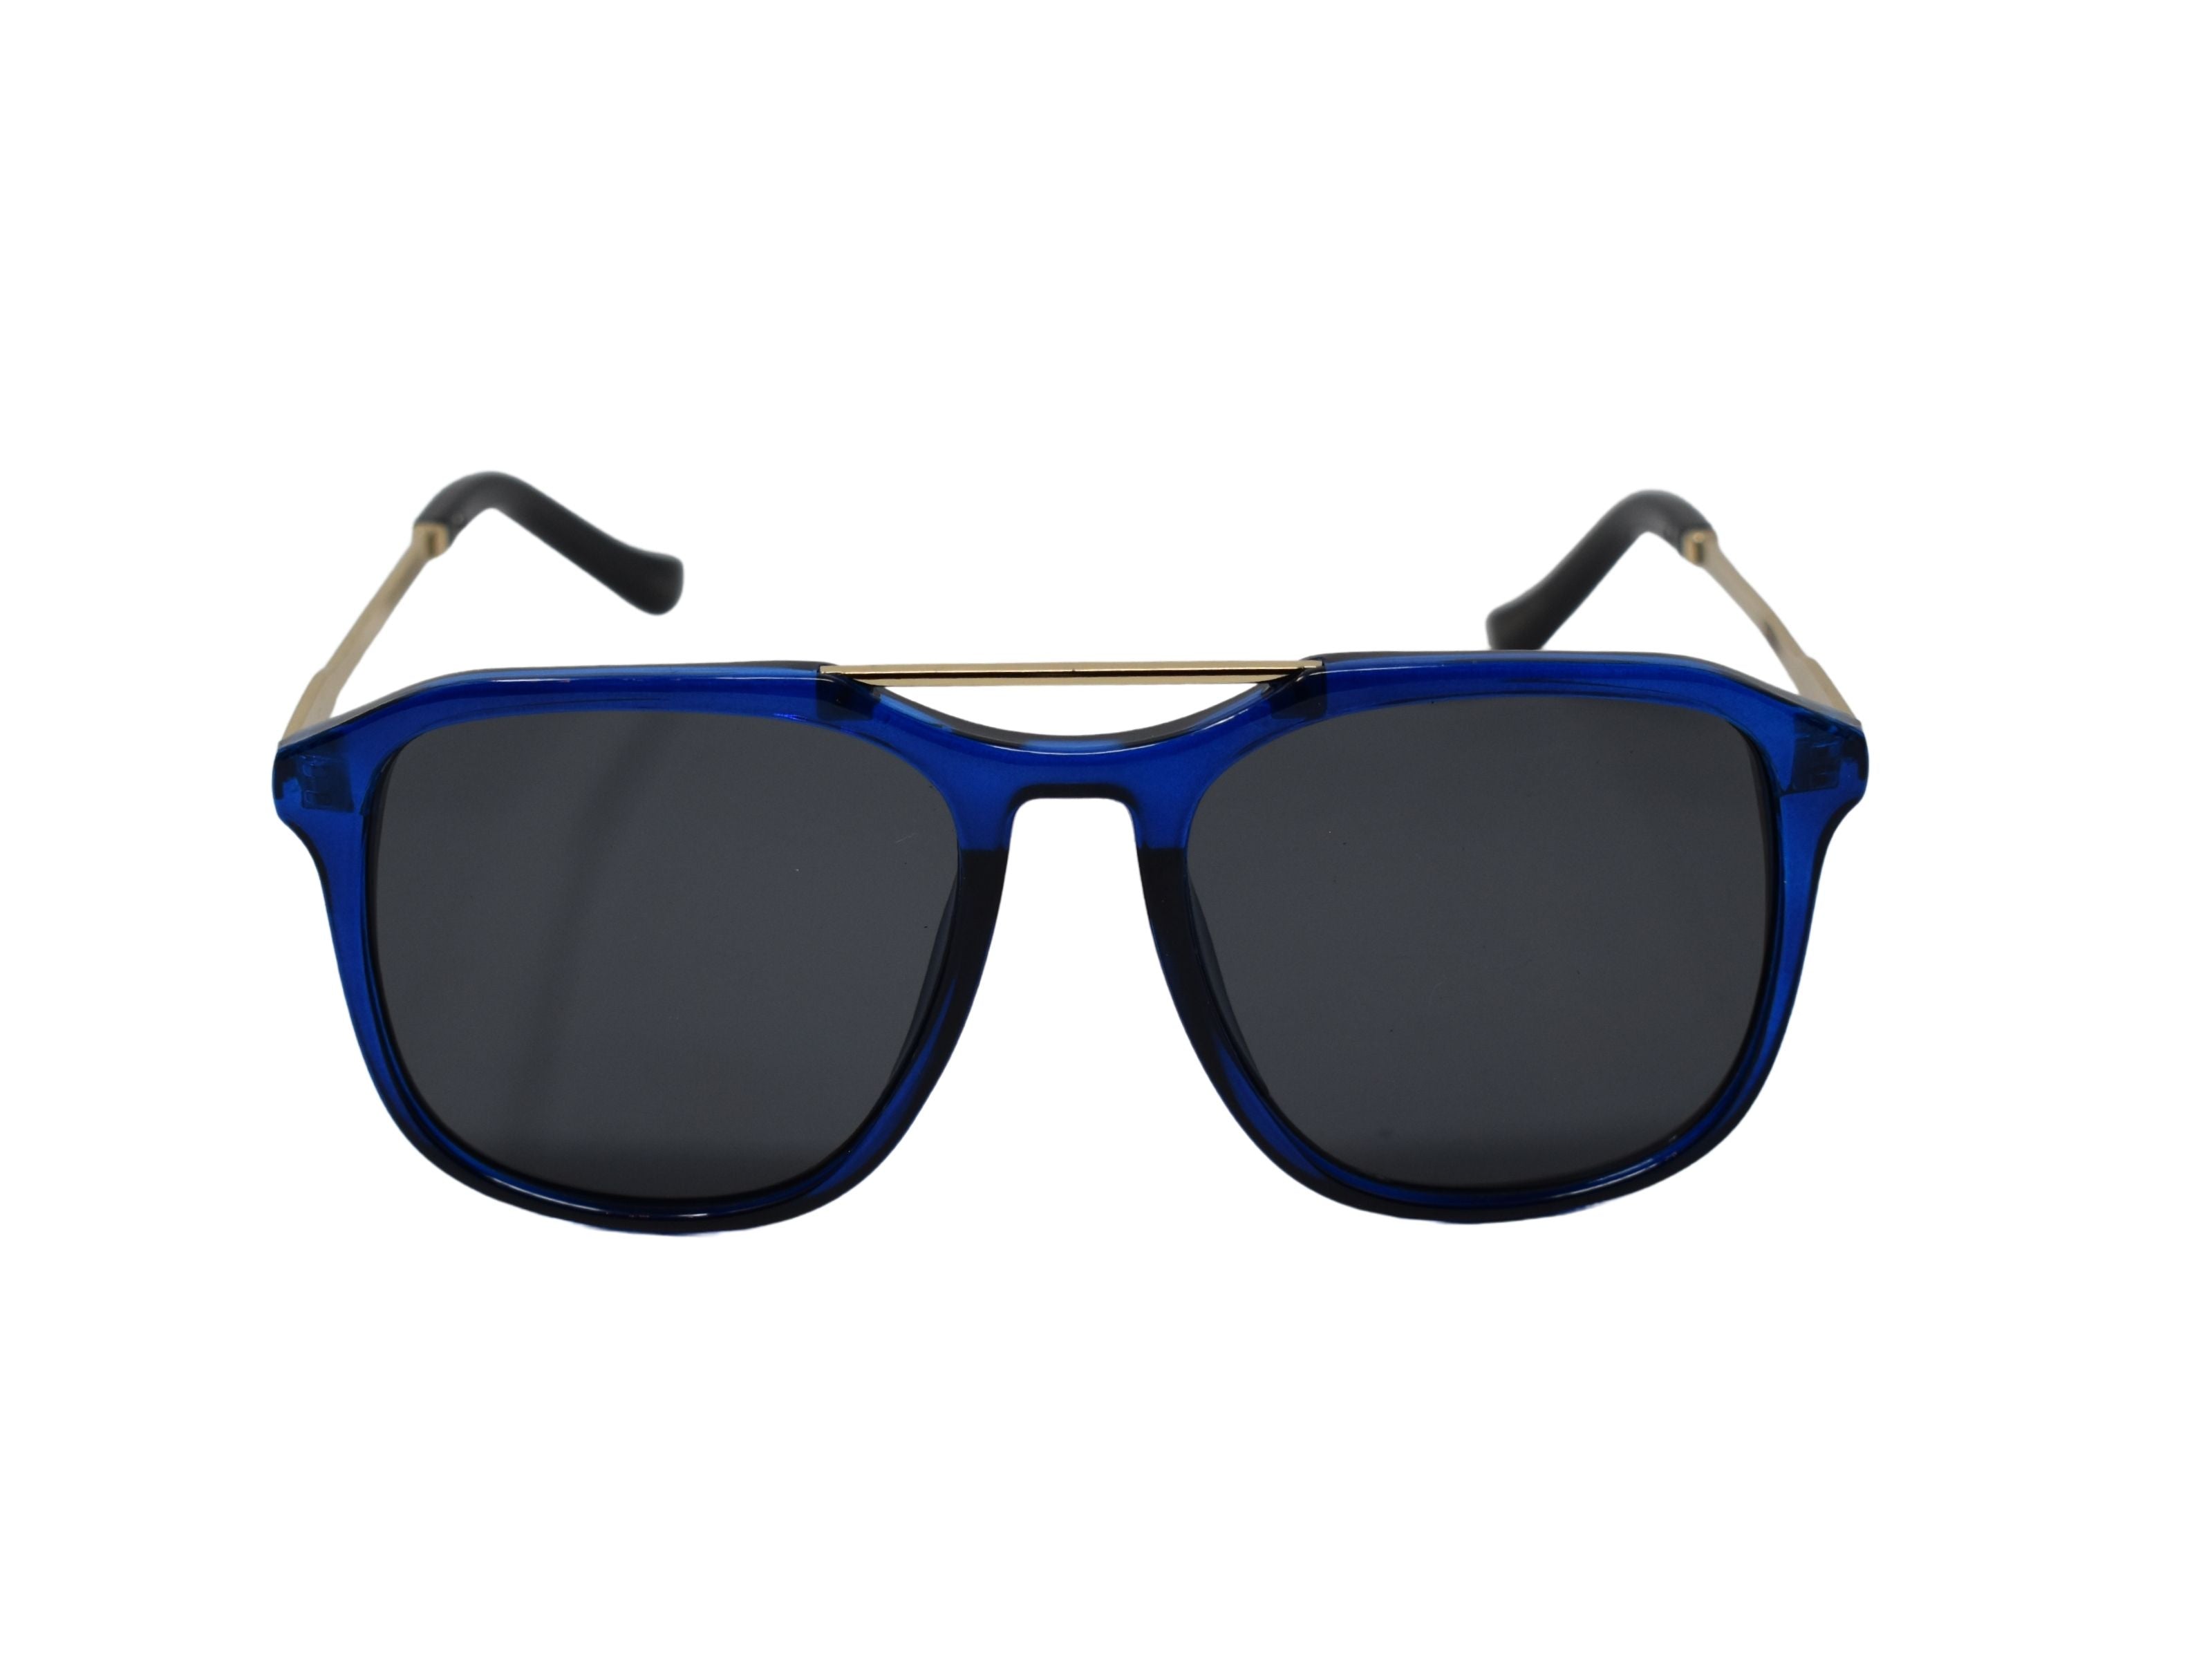 Bring an instant chic appeal with our stylish Breita blue aviator sunglasses.